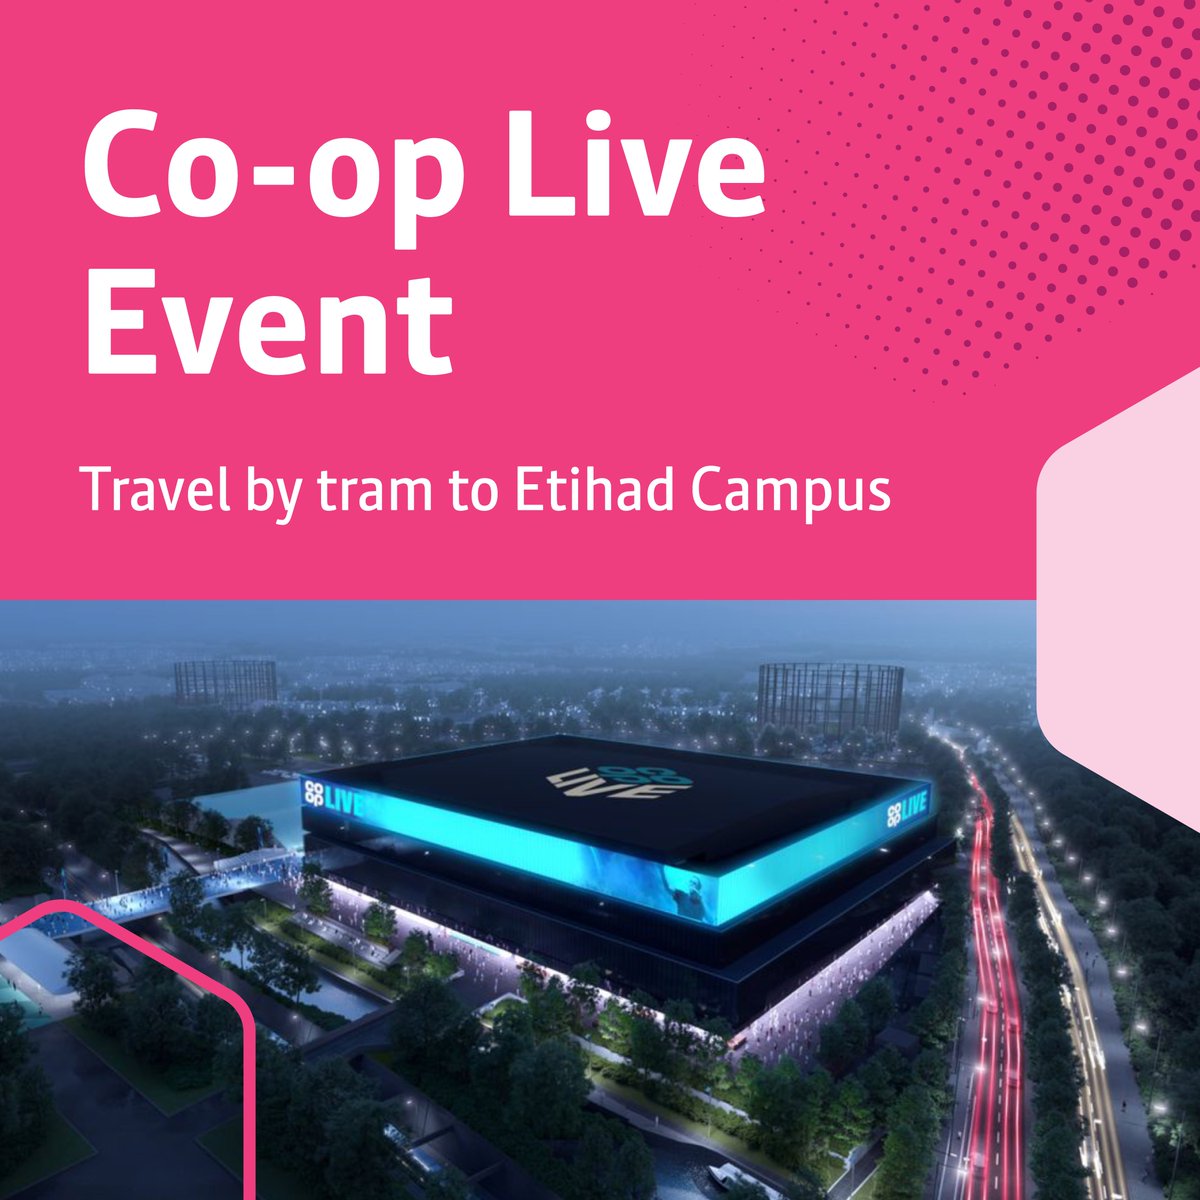 Going to watch @NICKIMINAJ at @TheCoopLive tonight?
 
Don't forget:
 
- Travel included for event-goers on tram & post-event shuttle buses
- Make sure that you know your last bus & tram times
- Visit beenetwork.com/co-op-live